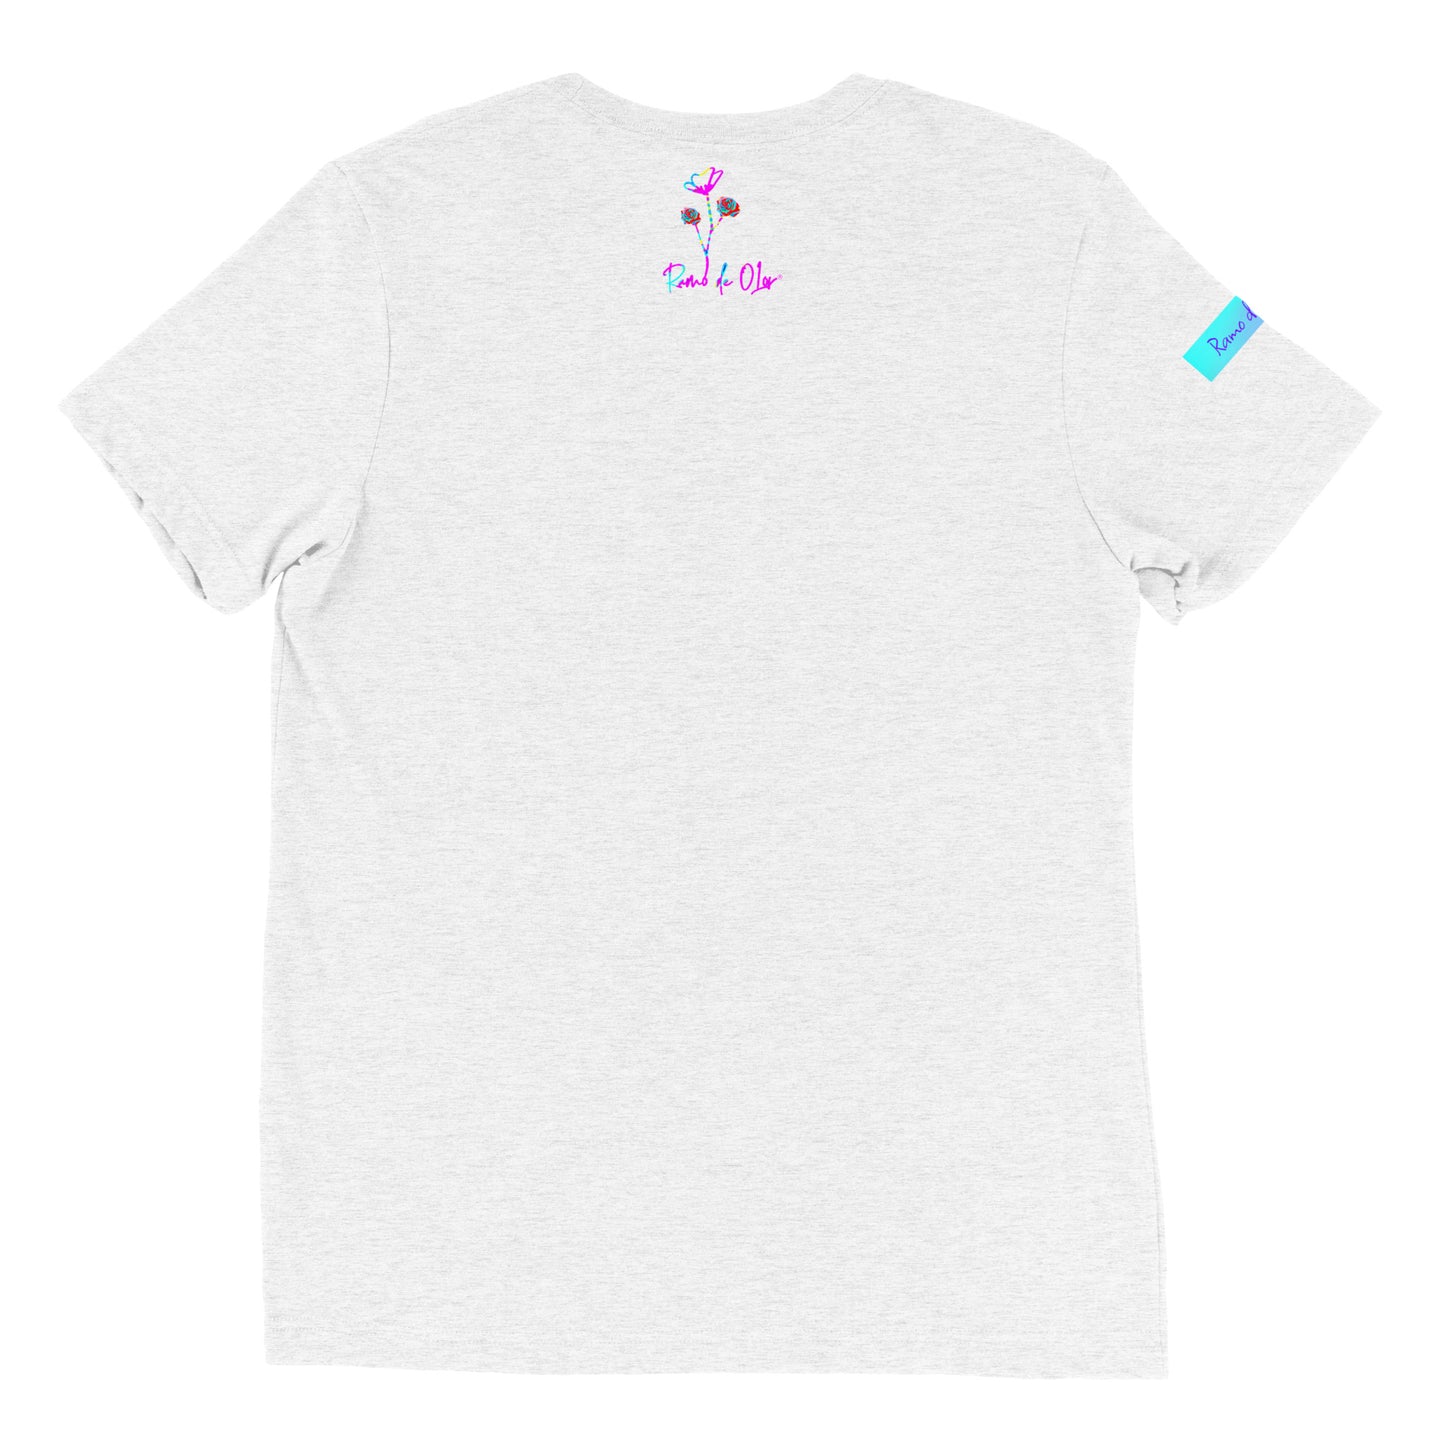 sT•K Be content within yourself x Live for others Tshirt